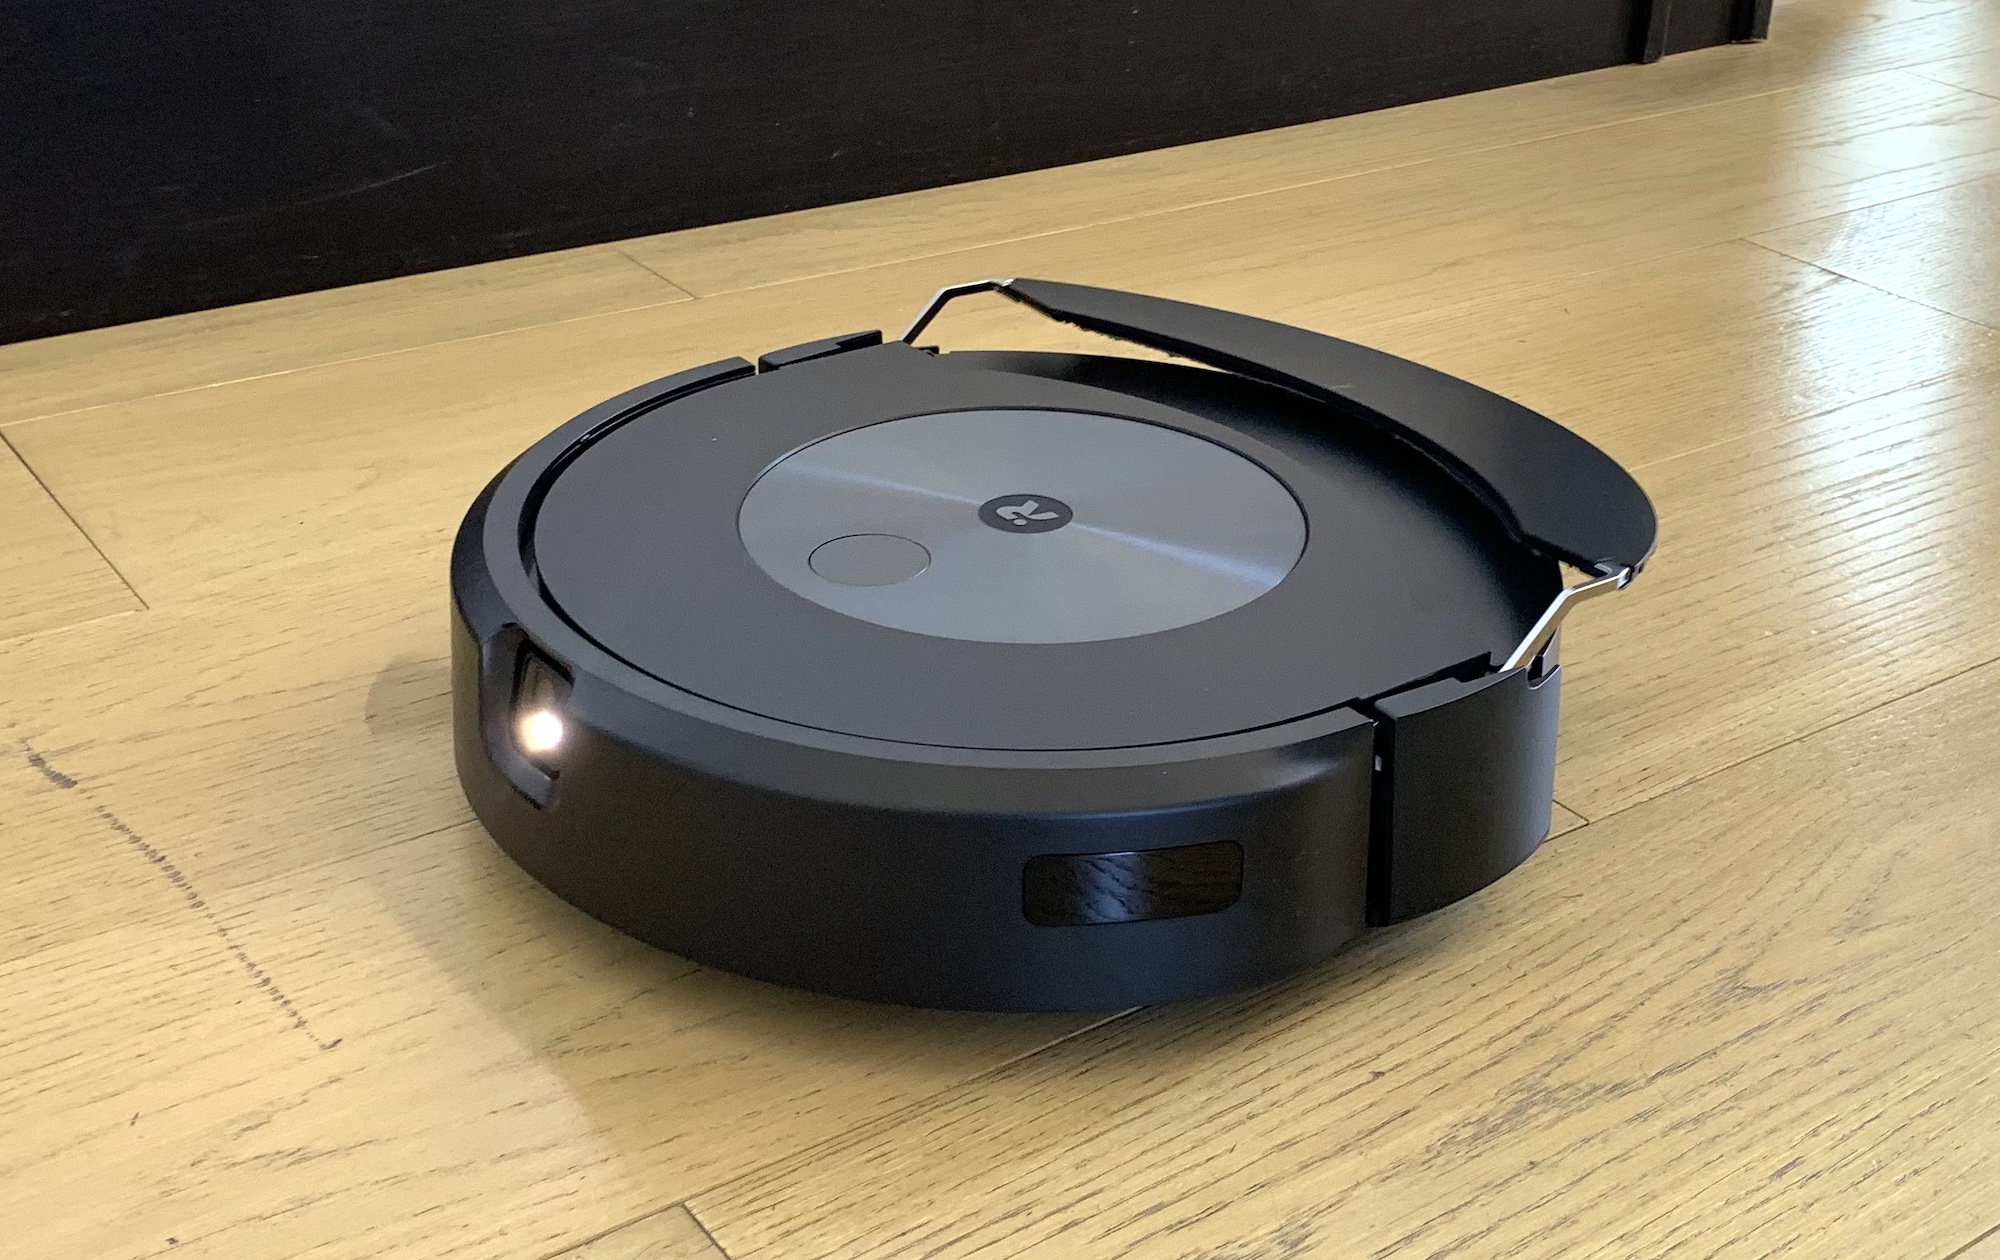 Review: The Future Is Here With the Roomba Combo J9+ Robot Vacuum